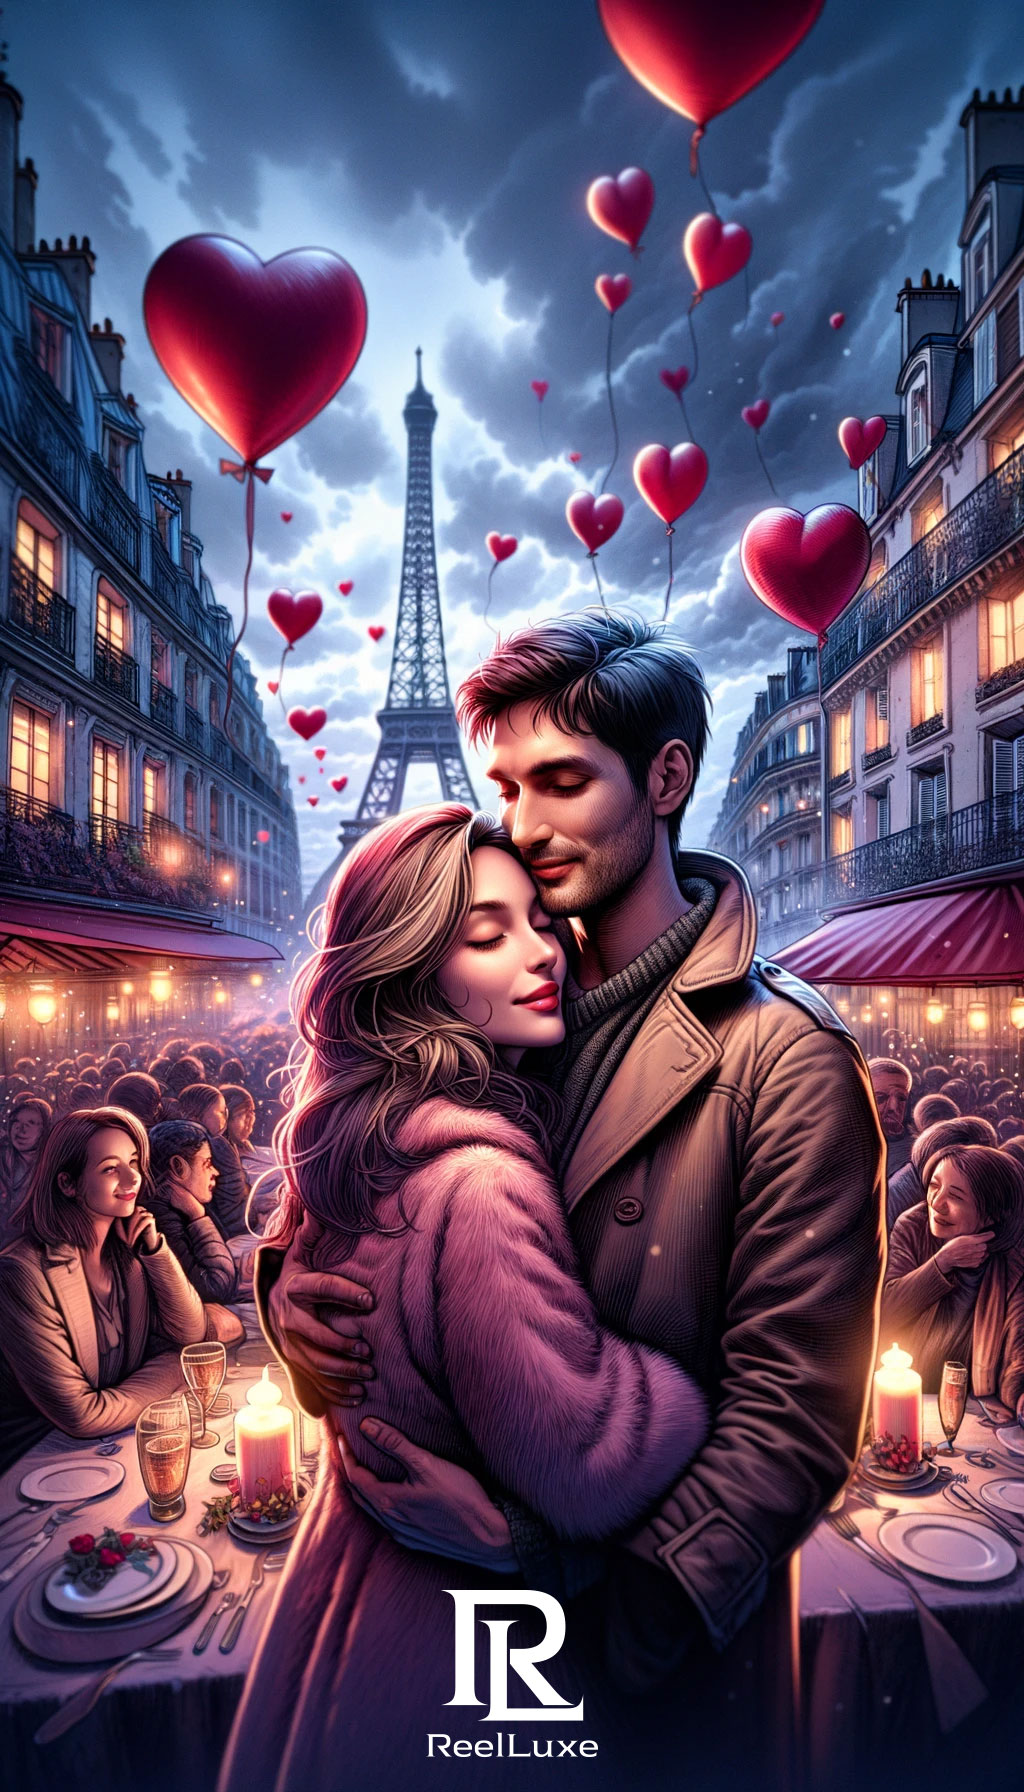 Romance in the Air – Valentine’s Day – Beauty and Fashion – Paris, France – 3